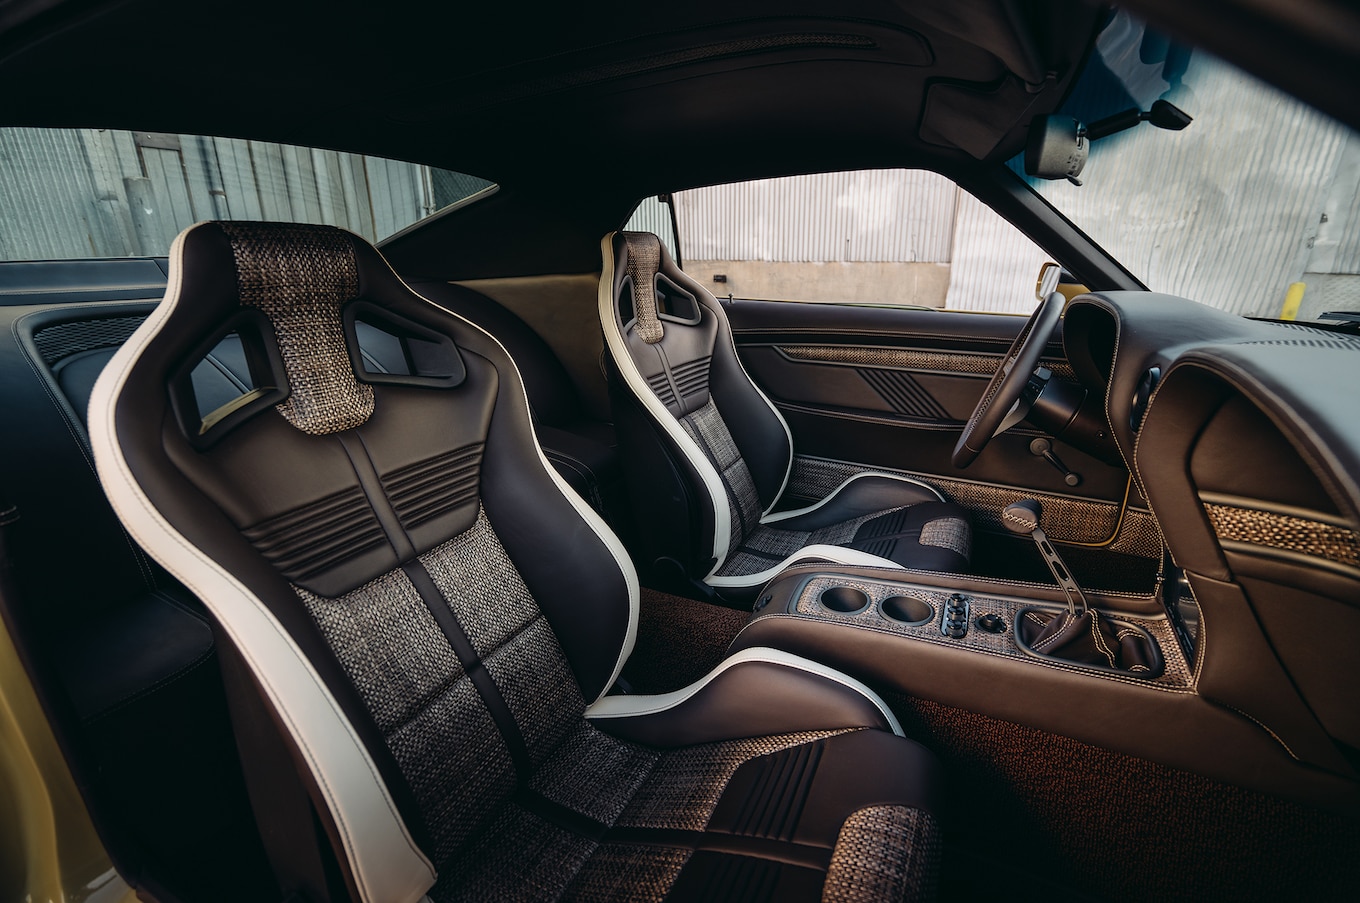 1970-Ford-Mustang-Boss-302-by-SpeedKore-and-Robert-Downey-Jr-front-interior-passenger-side.jpg